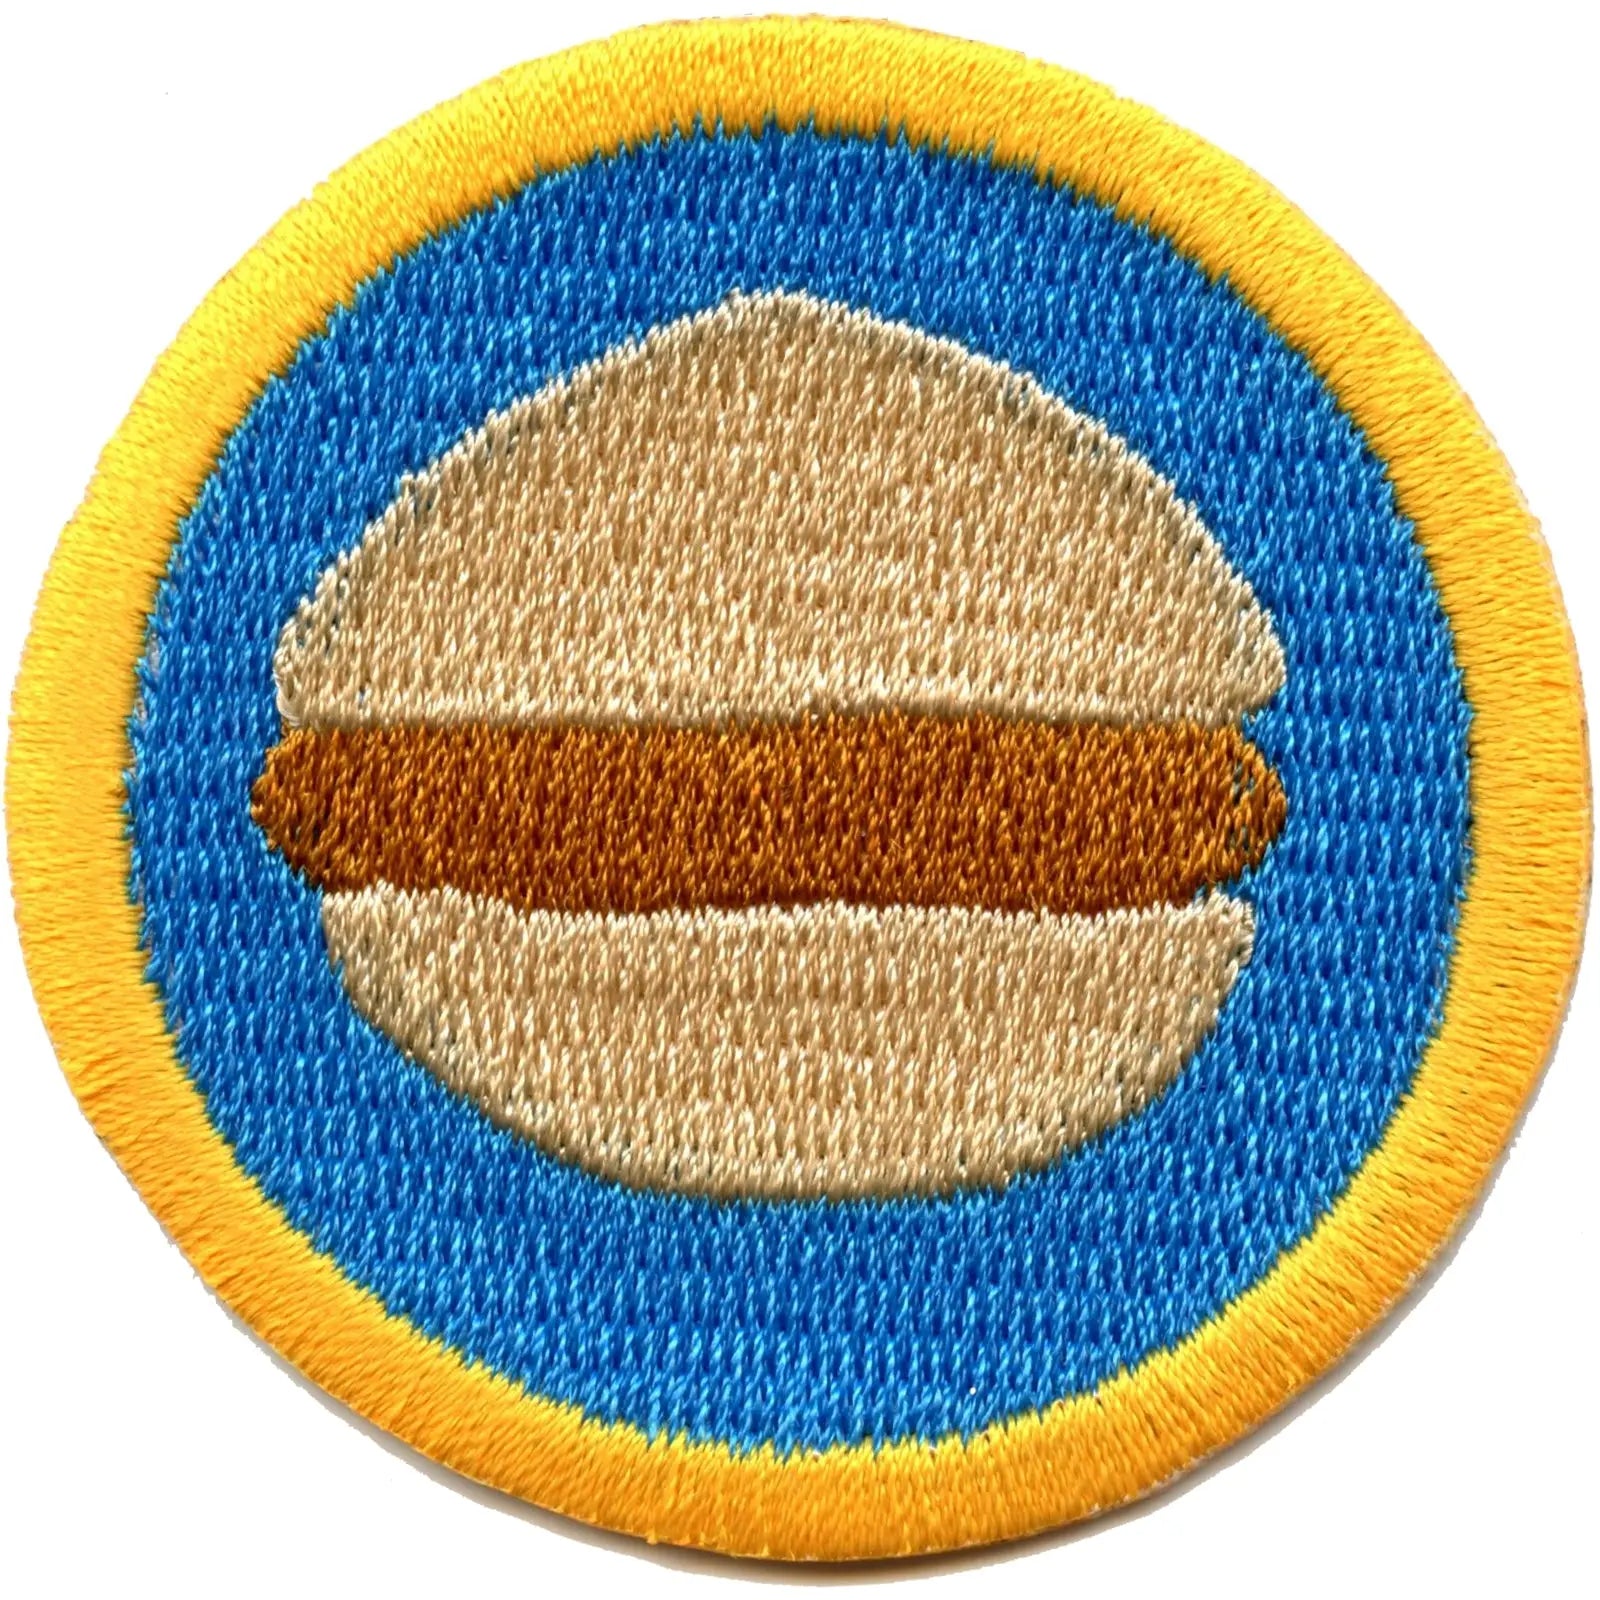 Hamburger Eating Merit Badge Embroidered Iron-on Patch 